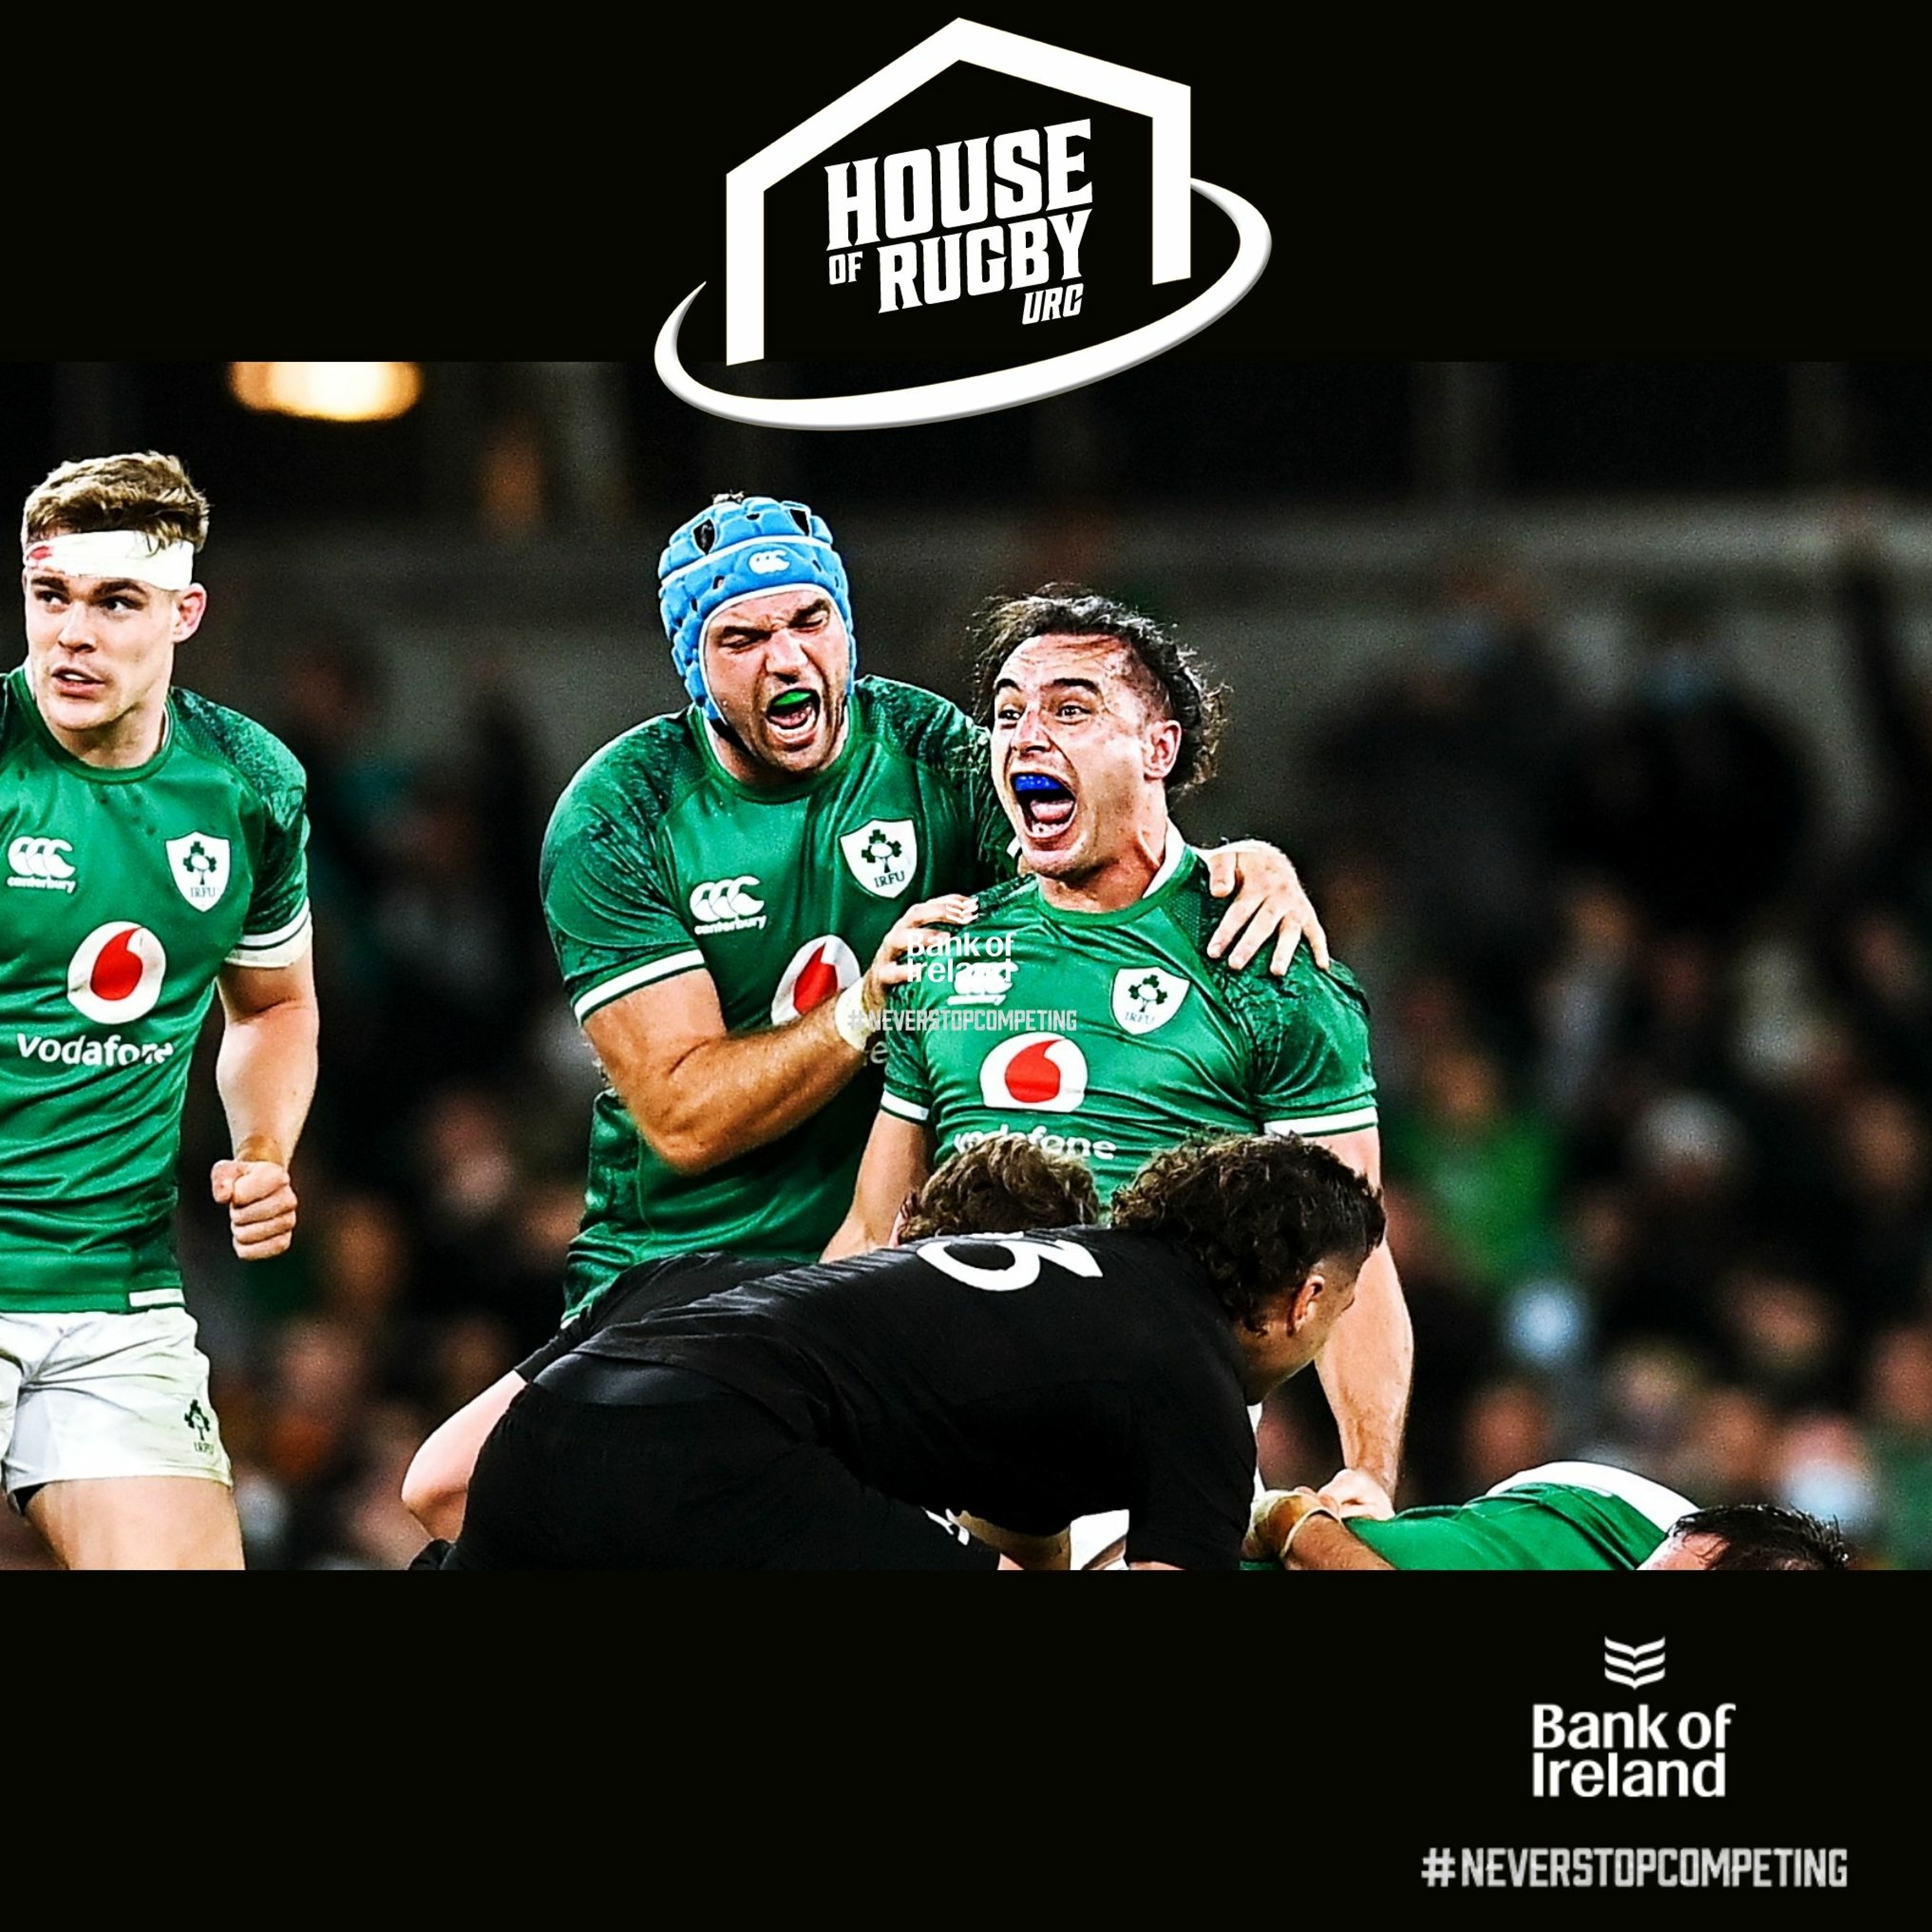 All Blacks conquered, James Lowe's tackle, Jack Conan's smile AND Felipe Contepomi chat